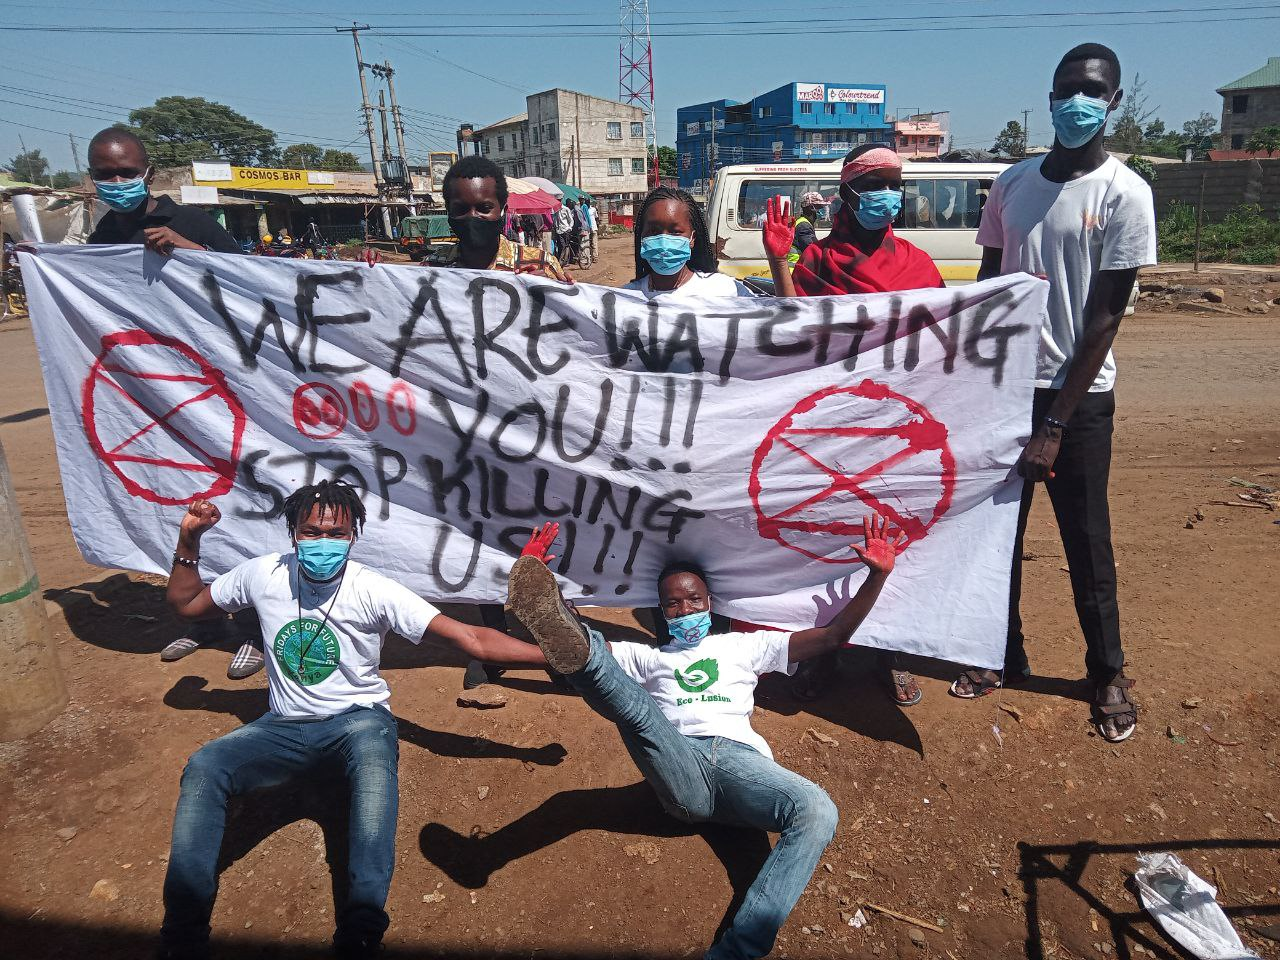 A group of XR Kisumu rebels hold a sign reading “We are watching you!!! Stop killing us!!!” Two rebels lie on the ground in front of the sign, one with his hands painted red